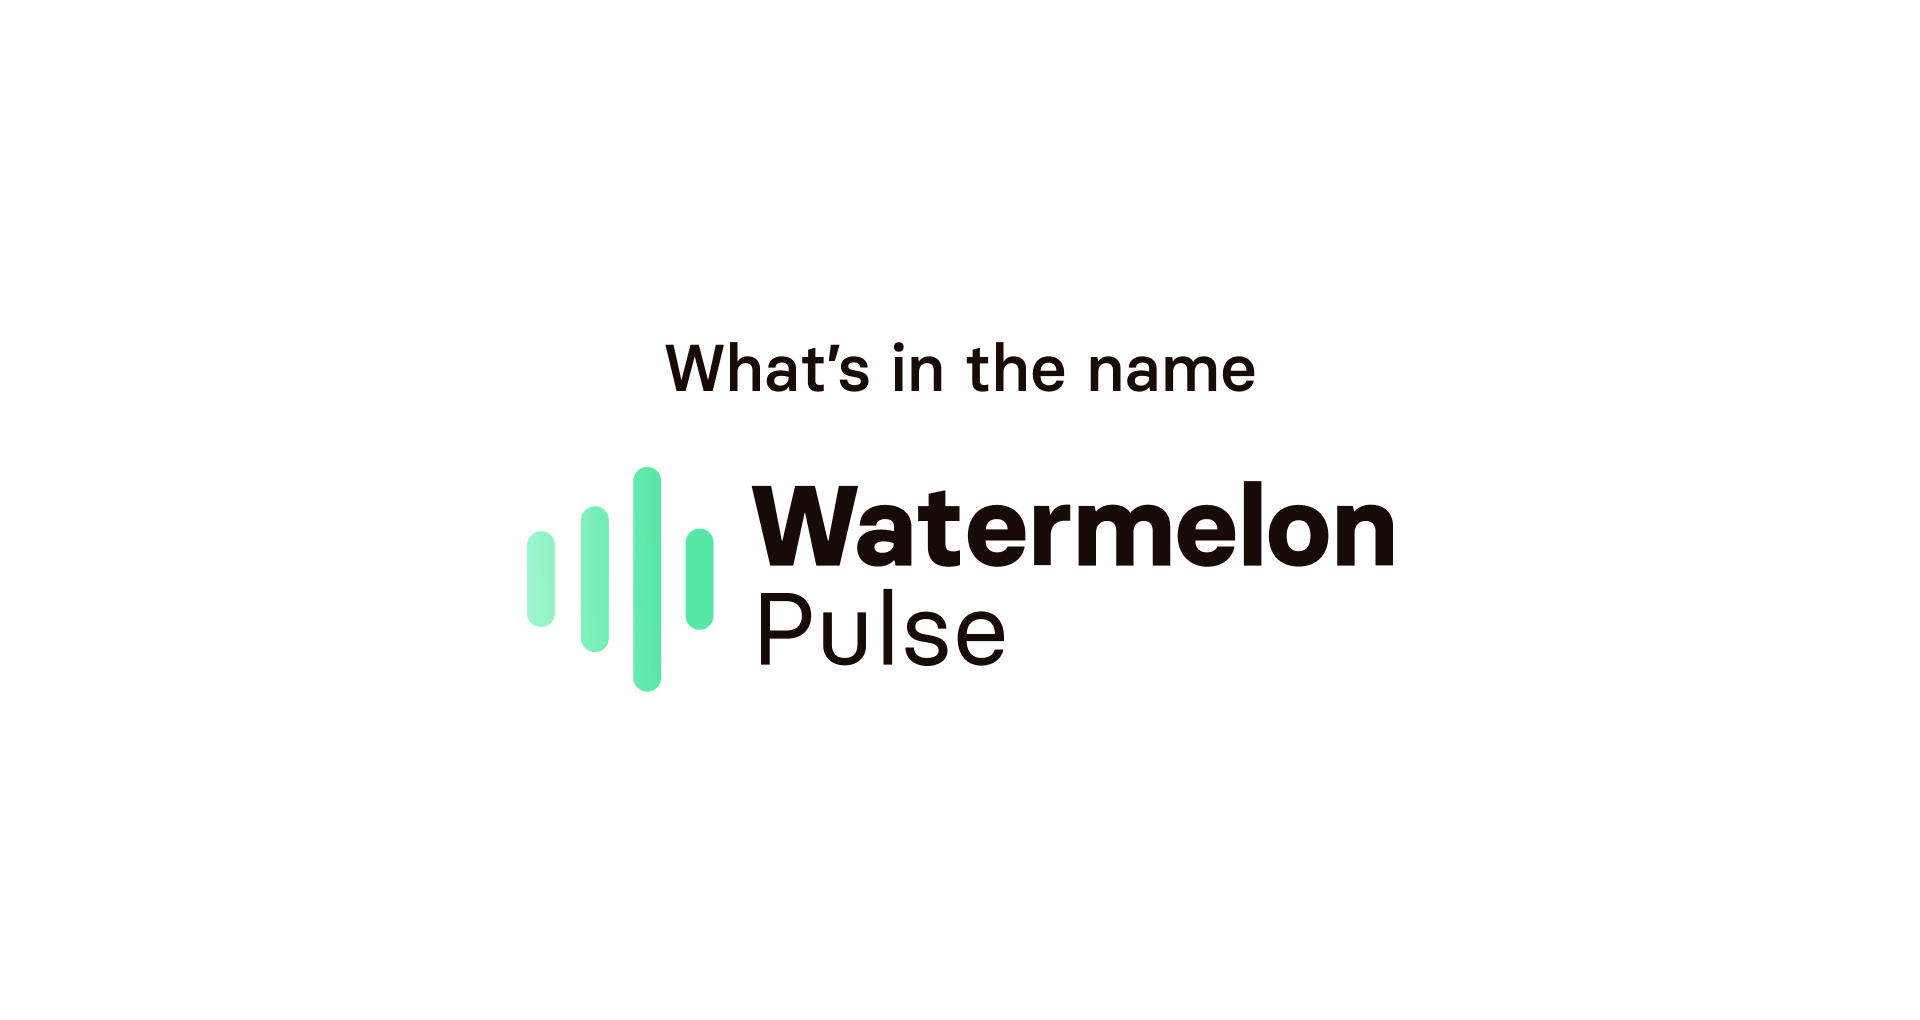 Why the name Watermelon Pulse?